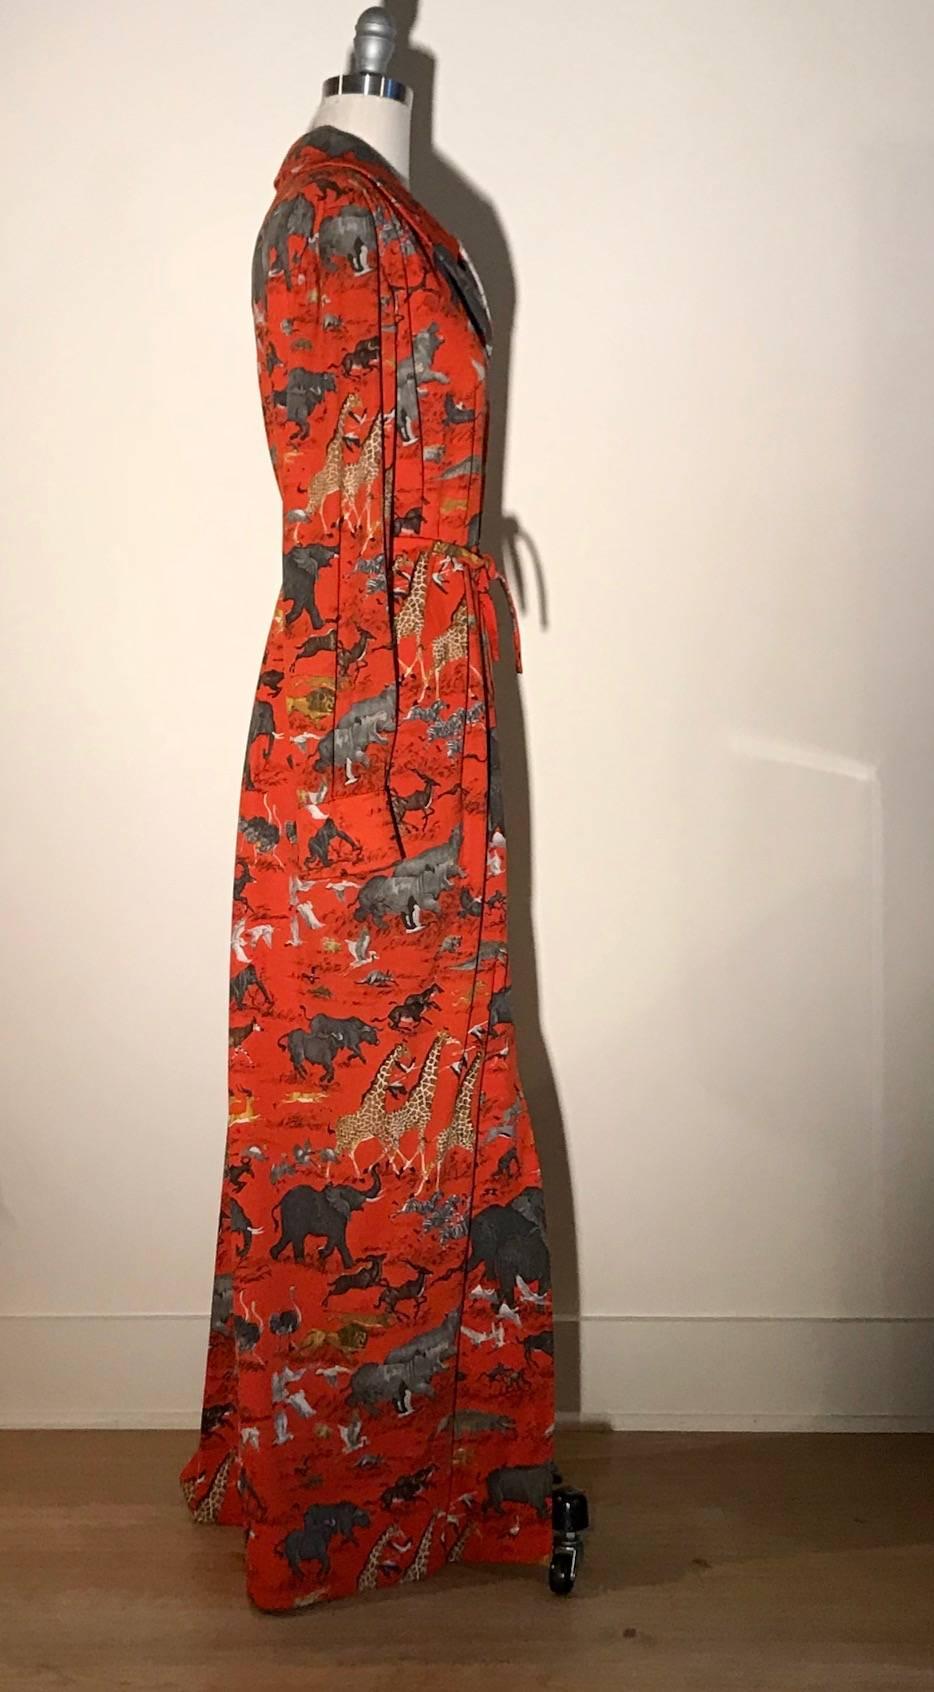 Vintage red maxi length shirt dress by Ferdinando Sarmi New York with all over safari print, featuring elephants, rhinos, giraffes, gazelles, and more. Includes narrow belt in same fabric (not attached.) Hidden zipper at front center. Three hidden